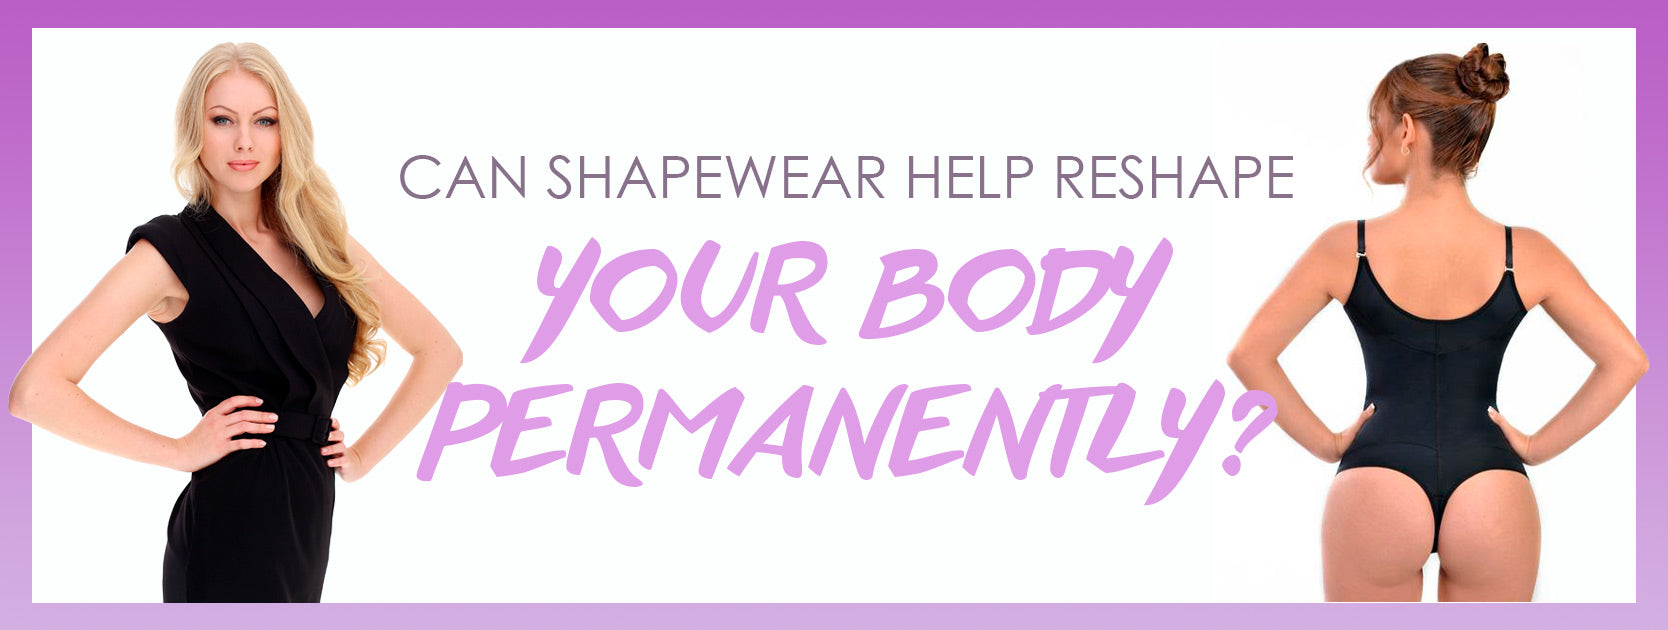 Can Shapewear Reshape Your Body Permanently?